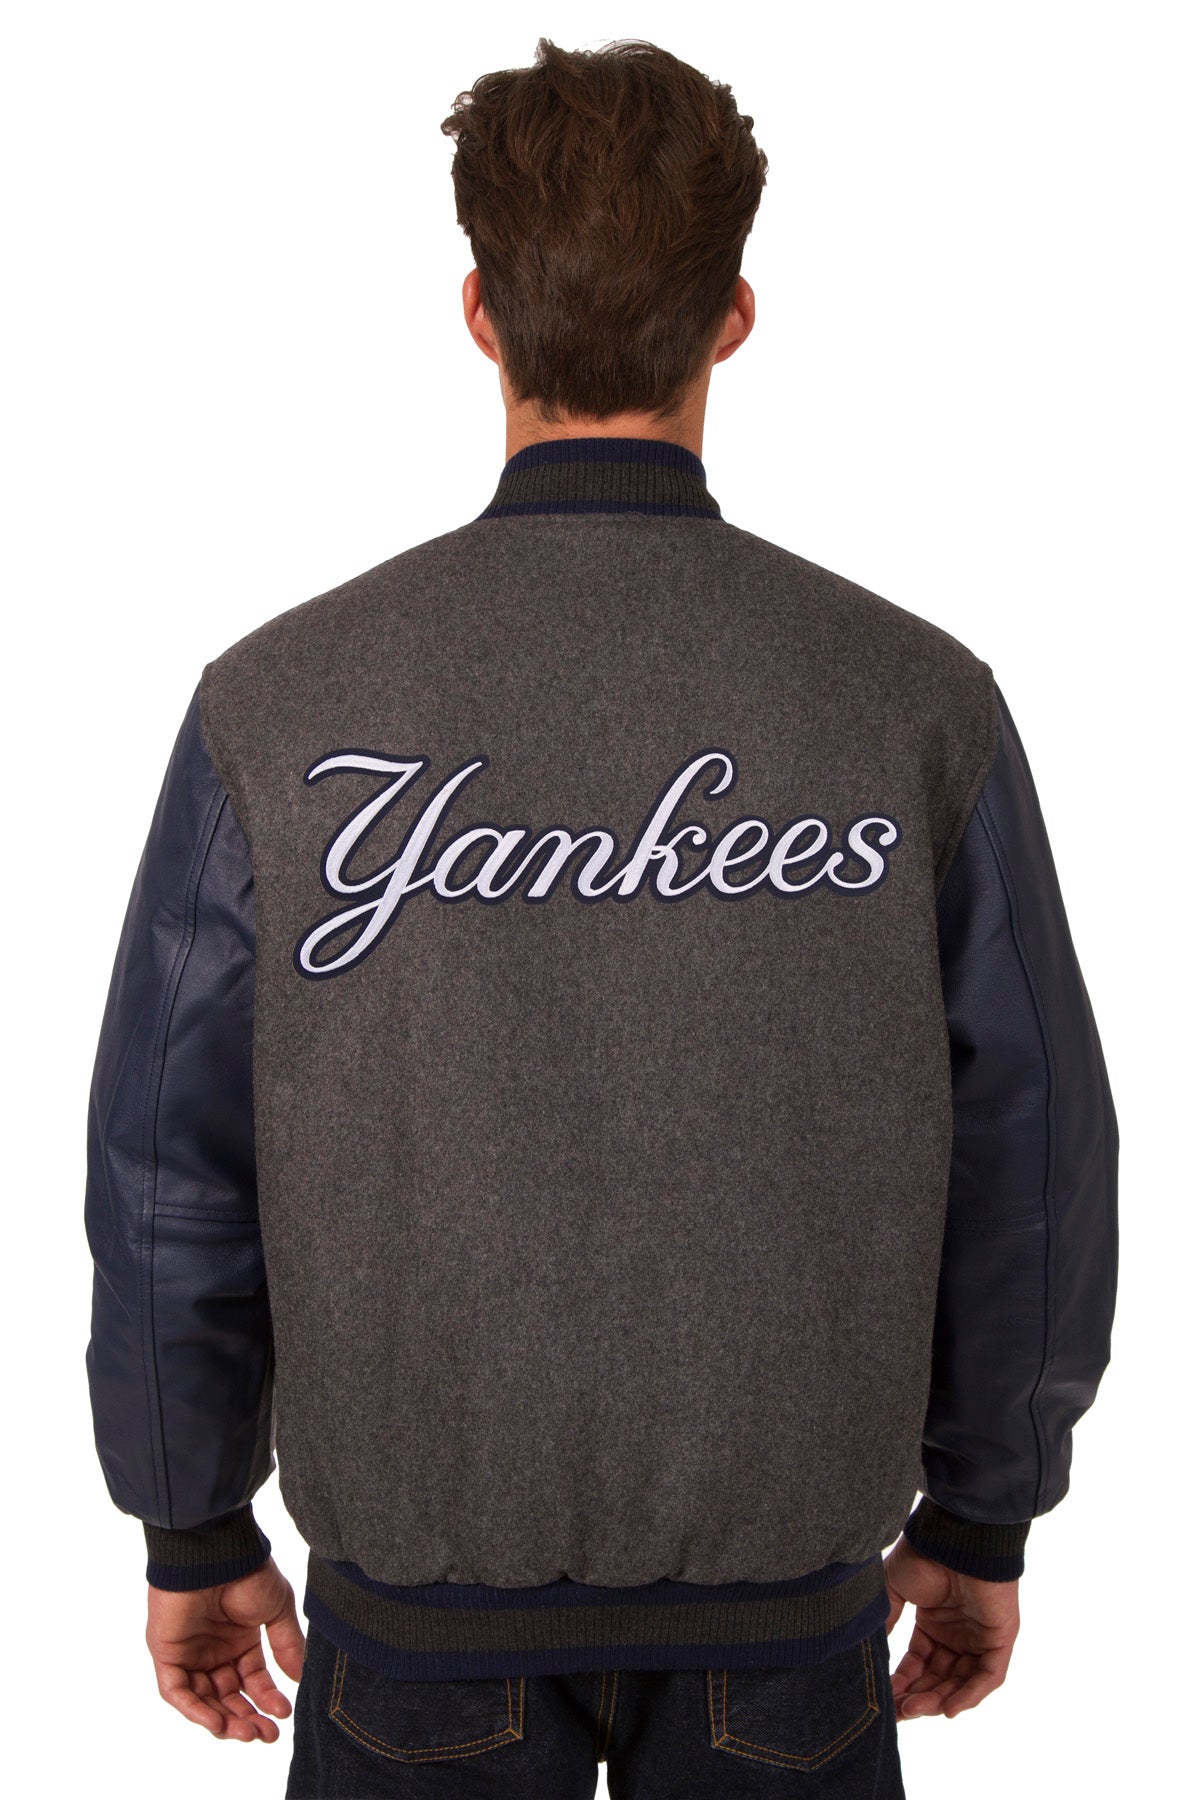 New York Yankees Reversible Wool and Leather Jacket